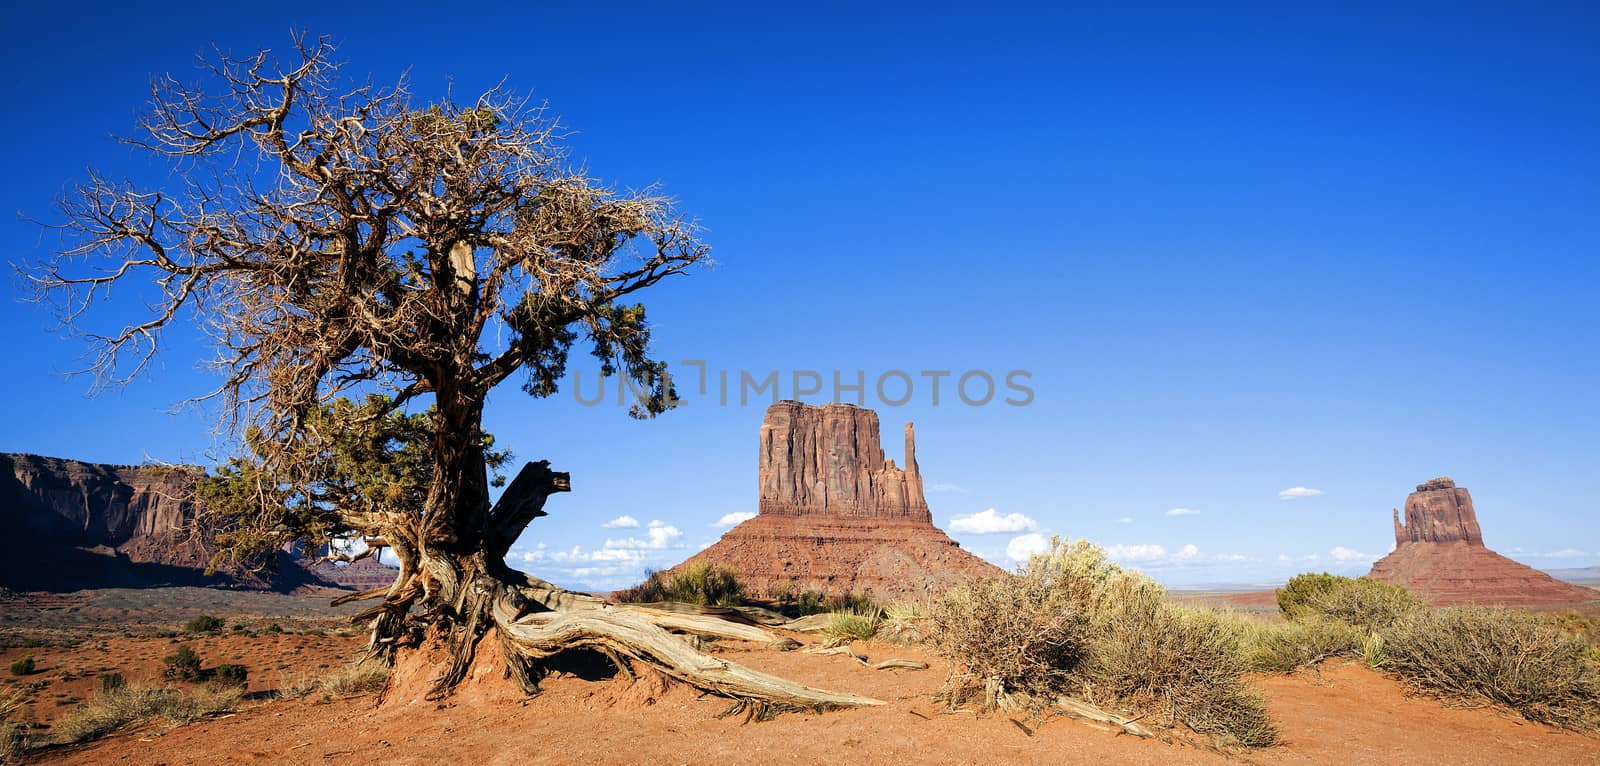 Panoramic view of Monument Valley and tree, USA